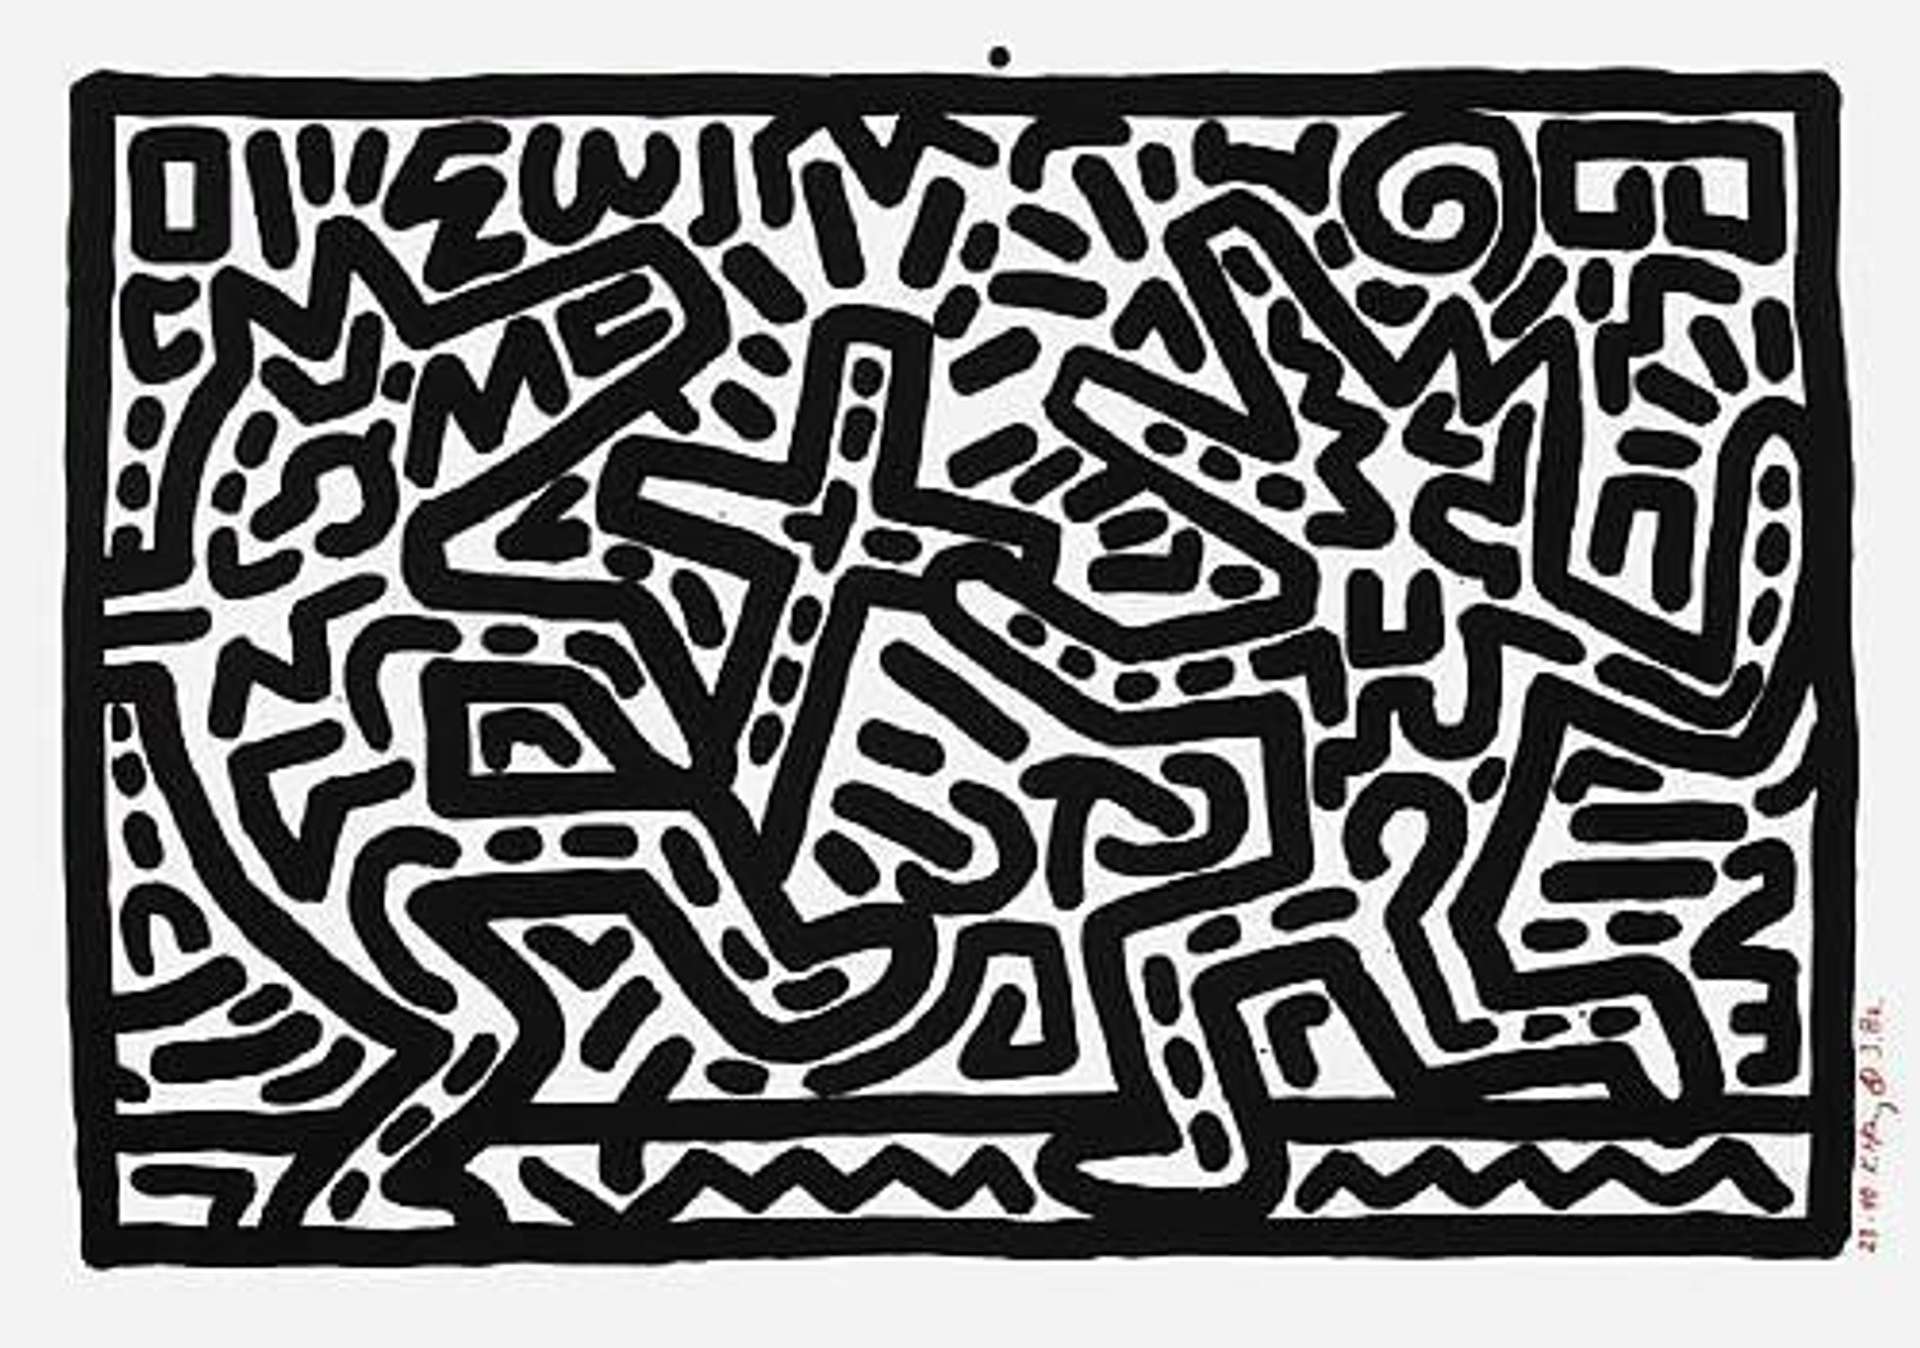 Plate VI, Untitled 1 - 6 - Signed Print by Keith Haring 1982 - MyArtBroker